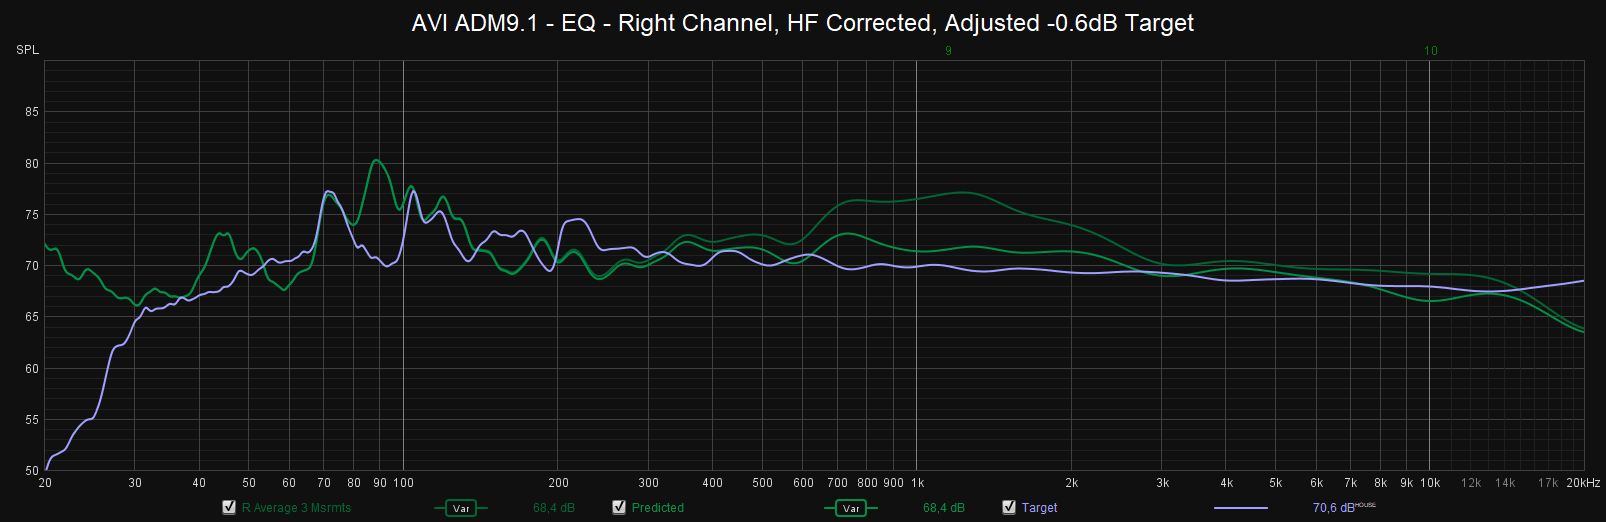 EQ Right Adjusted Target.png